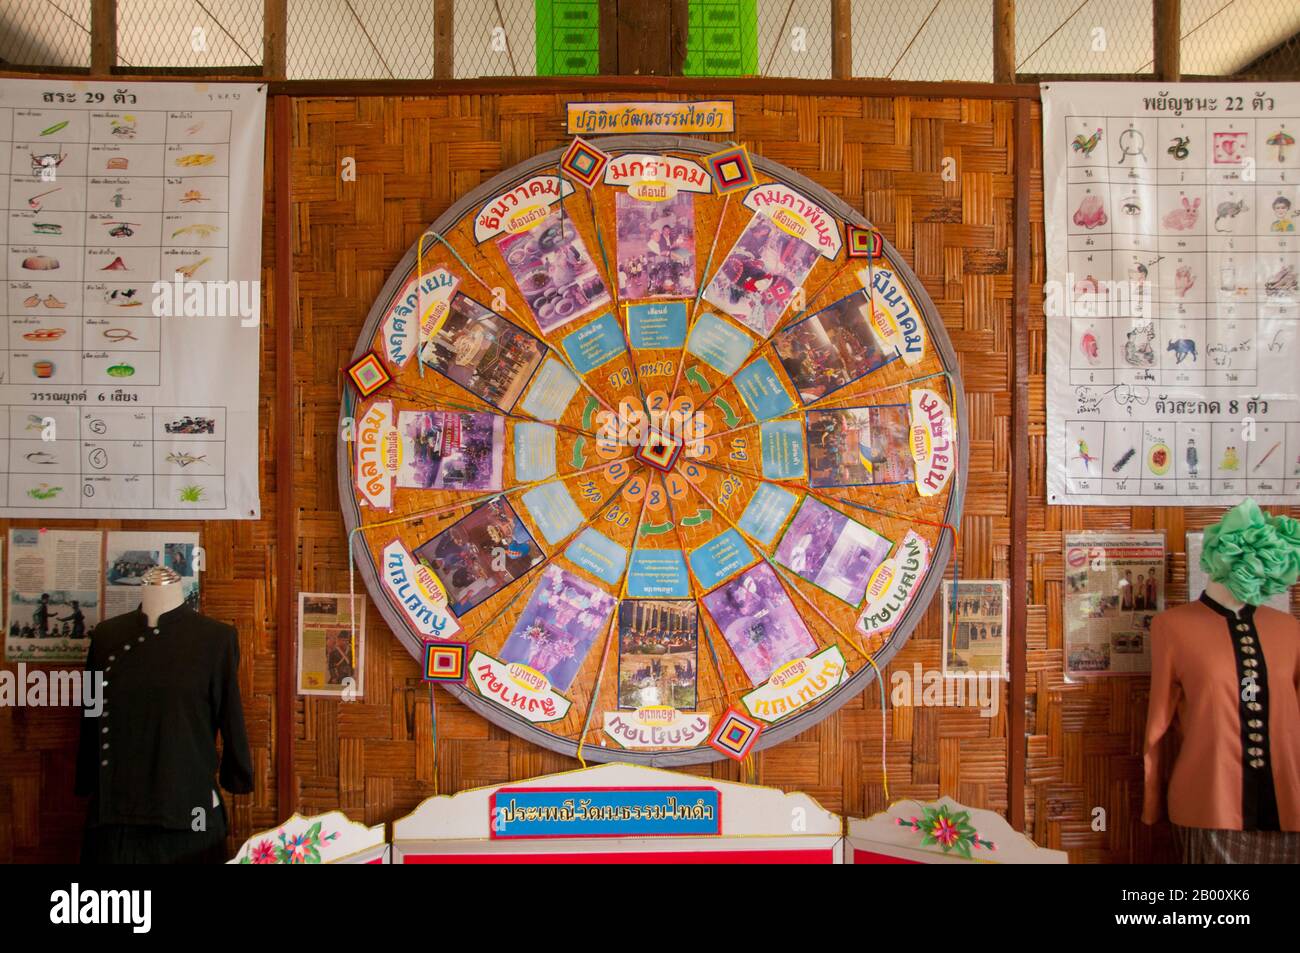 Thailand: A wheel showing the 12 month cycle of festivals and events in the Tai Dam calendar, situated at the local school, Ban Na Pa Nat Tai Dam Cultural Village, Loei Province.  The Tai Dam or Black Tai are an ethnic group found in parts of Laos, Vietnam, China, and Thailand.  Tai Dam speakers in China are classified as part of the Dai nationality along with almost all the other Tai peoples. But in Vietnam they are given their own nationality (with the White Tai) where they are classified as the Thái nationality (meaning Tai people). Stock Photo